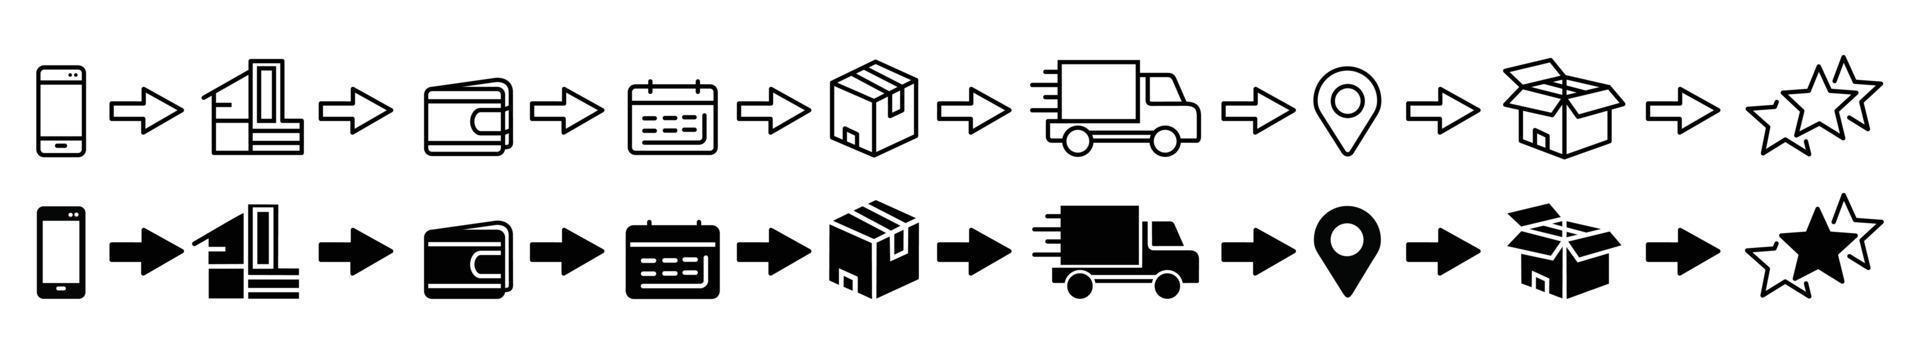 outline icons set about click and collect. Shopping online concepts delivery services steps vector